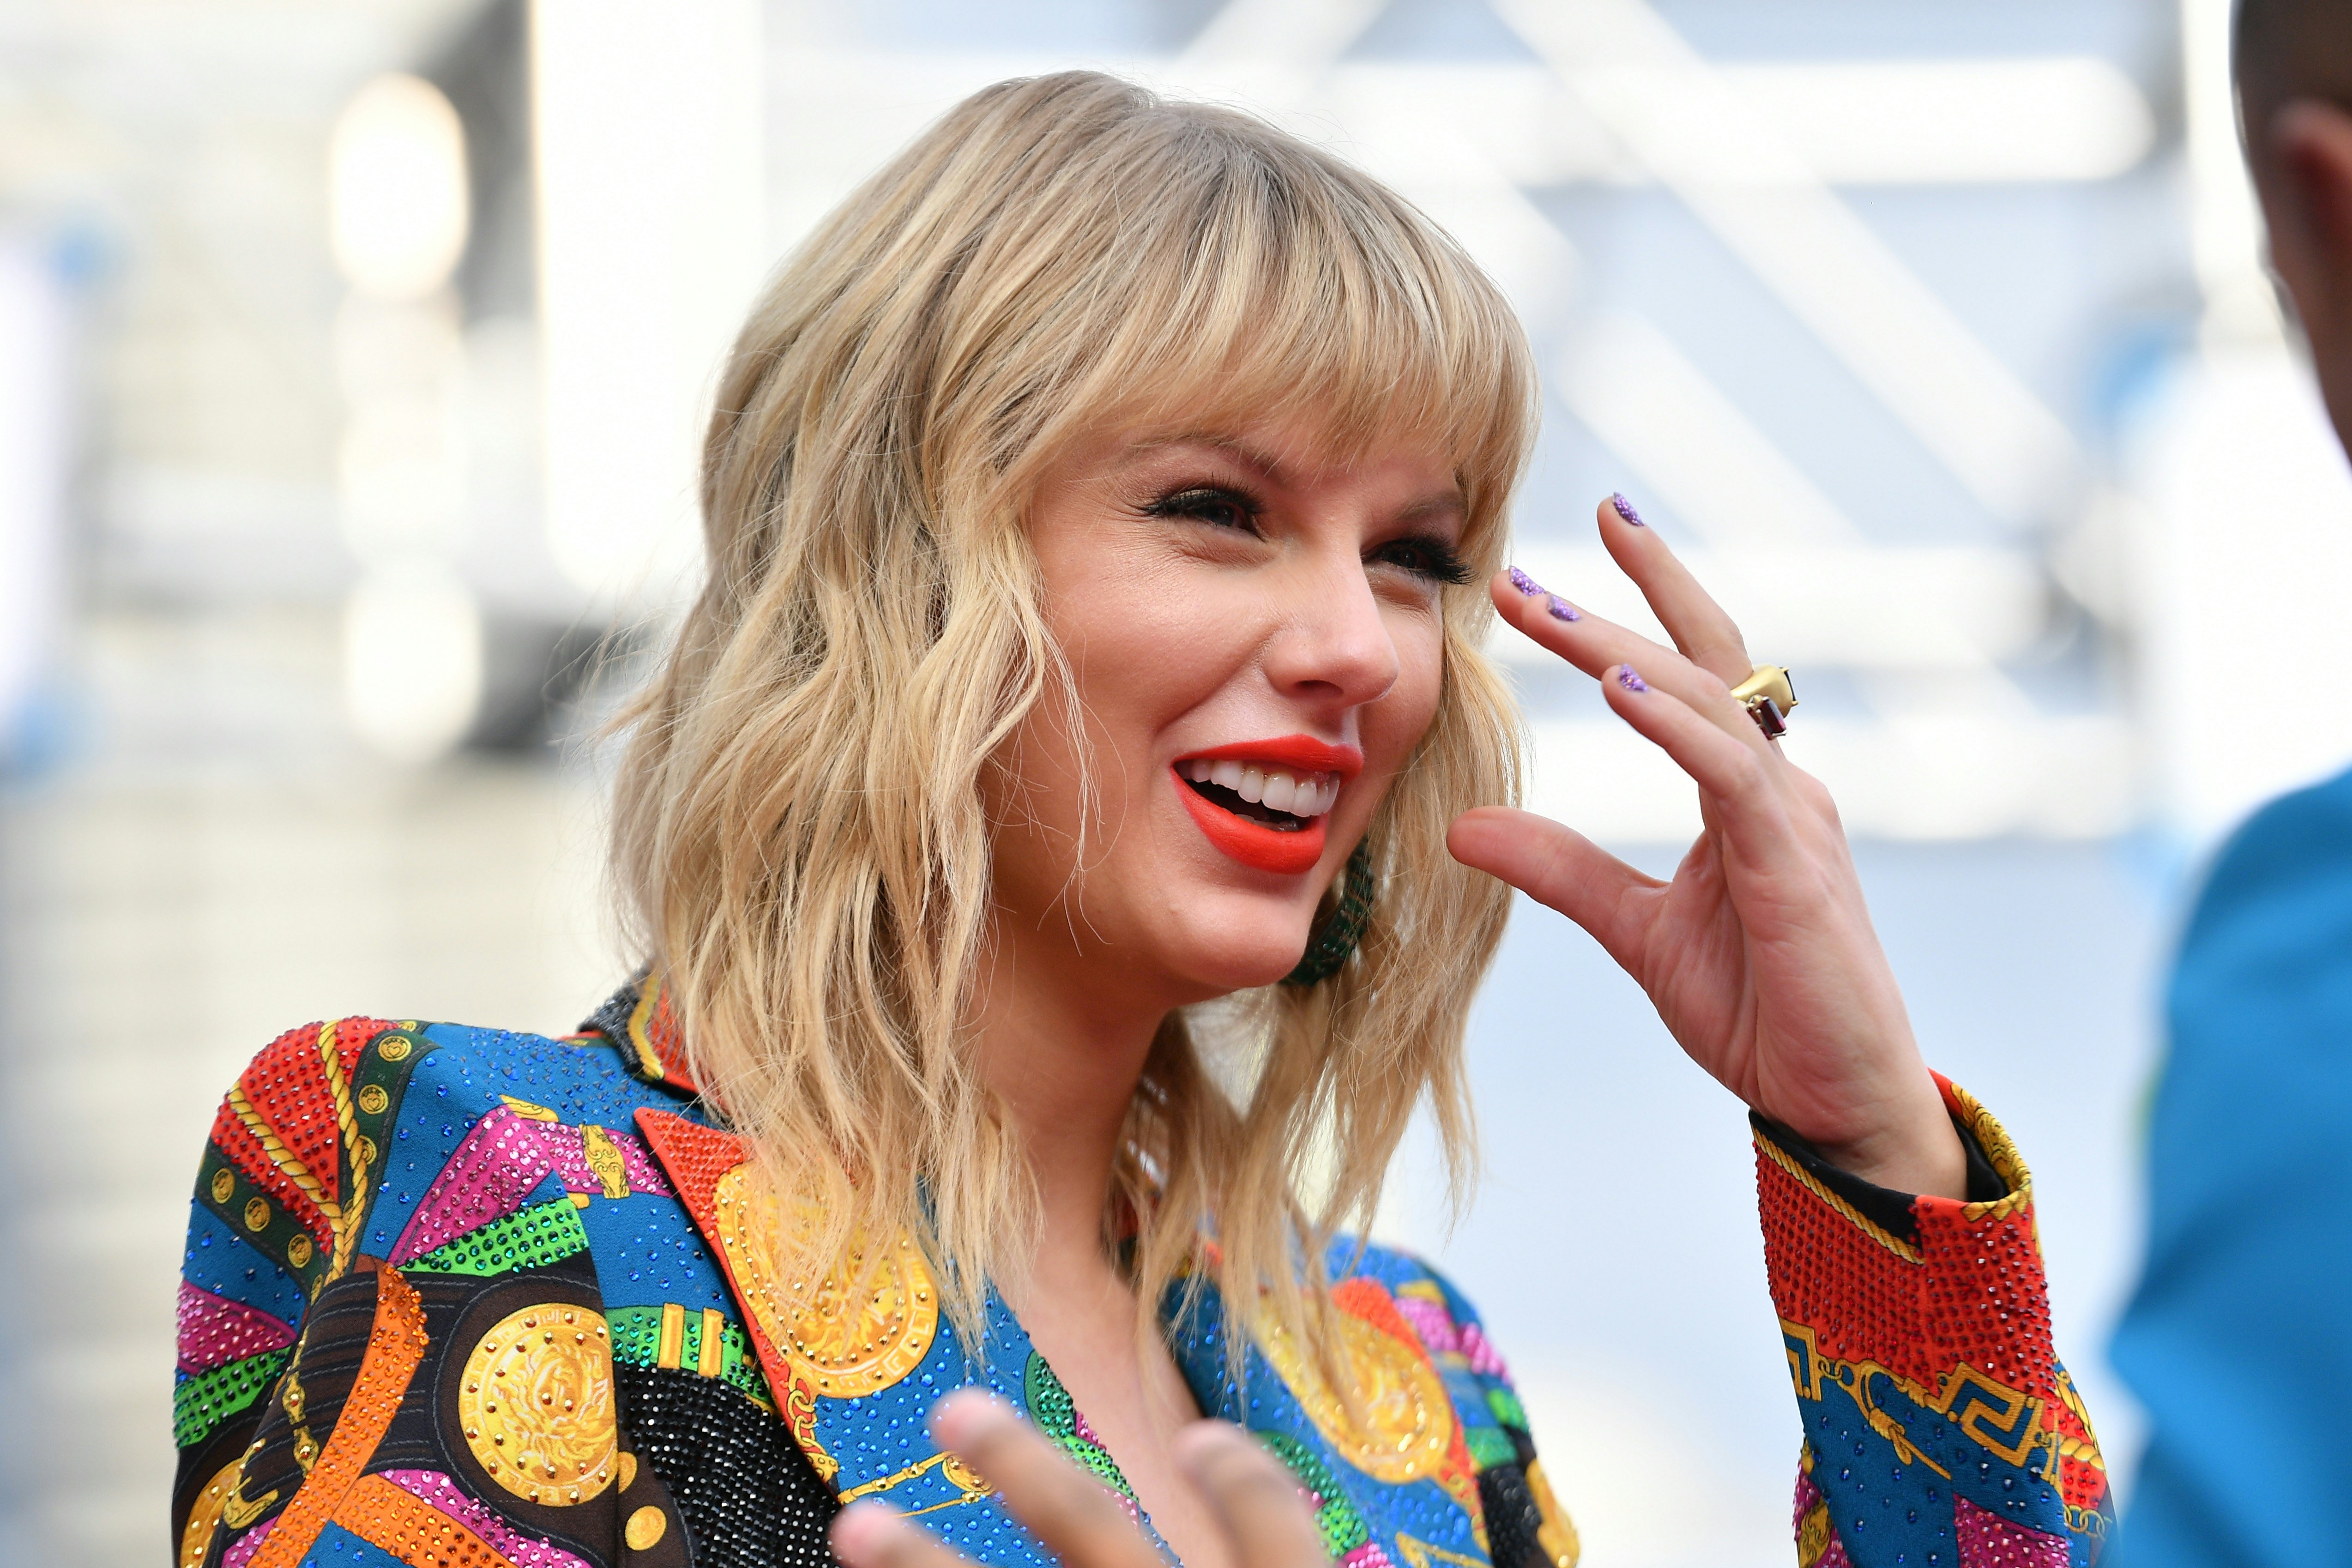 How To Get Tickets For Taylor Swifts 2020 Lover Tour In